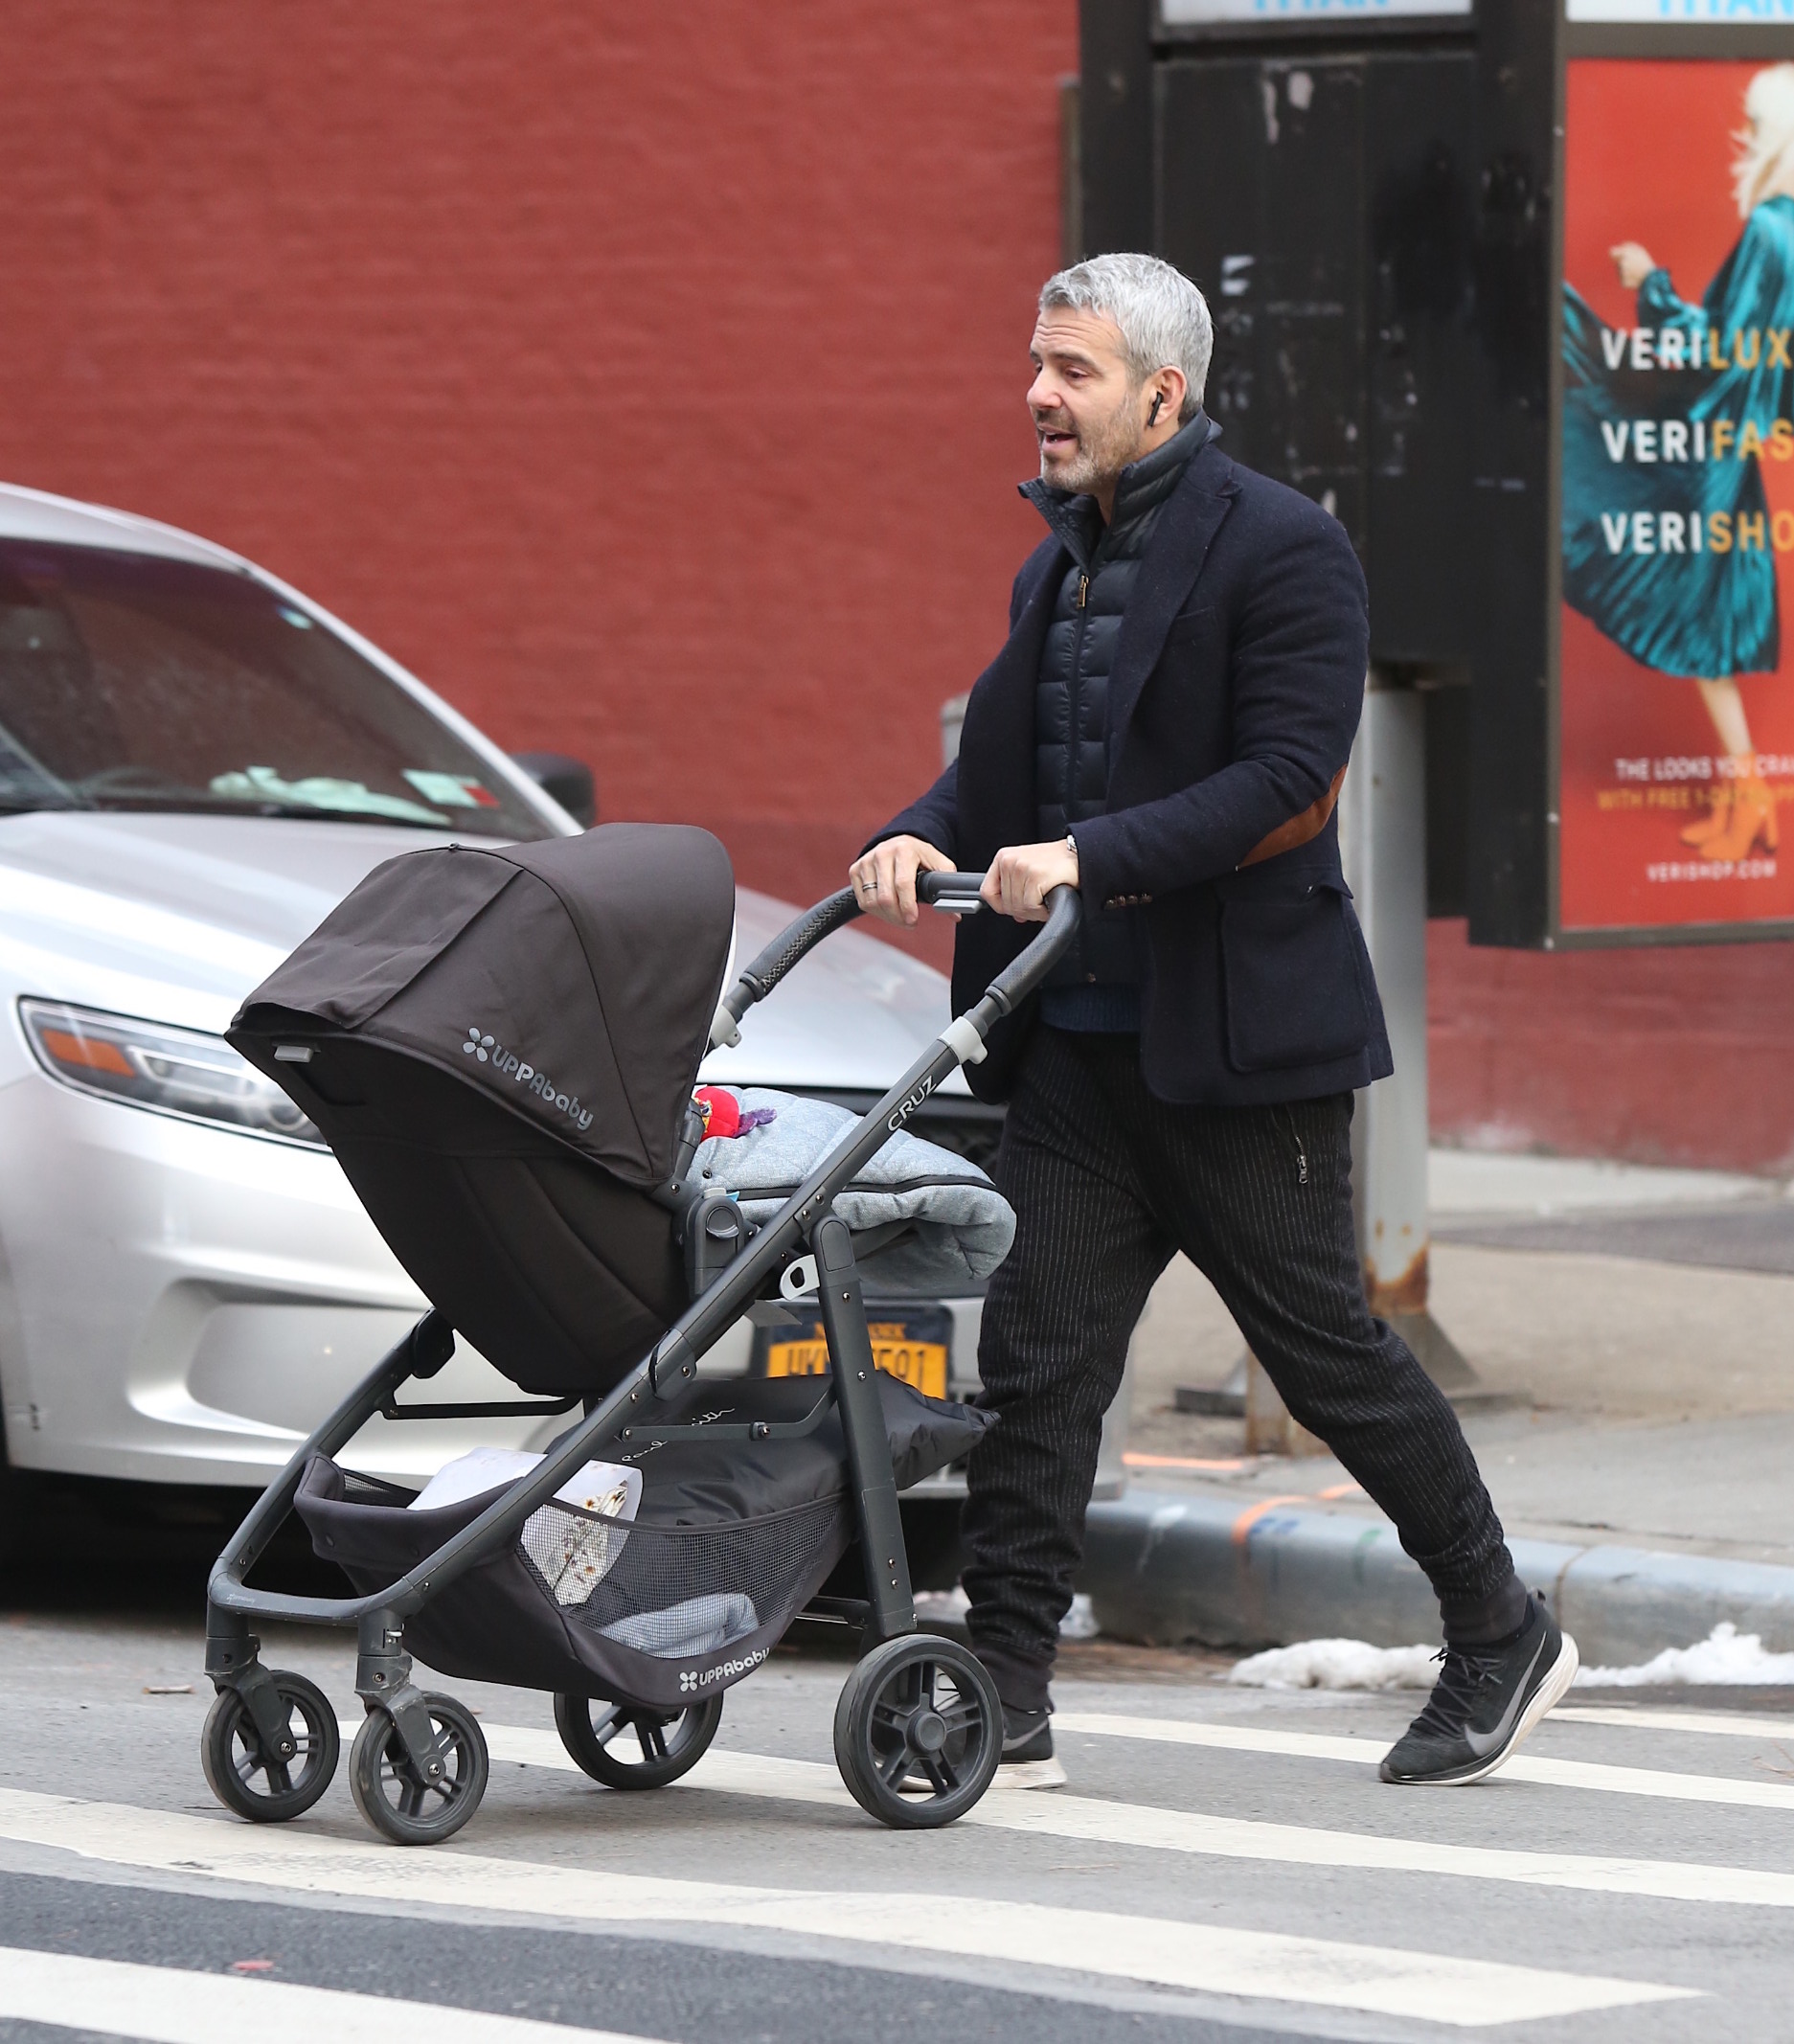 -New York, NY - 01/19/2020 - Andy Cohen Shopping in the West Villagewith son Benjamin

-PICTURED: Andy Cohen
-, Image: 493667890, License: Rights-managed, Restrictions: , Model Release: no, Credit line: INSTARimages.com / INSTAR Images / Profimedia